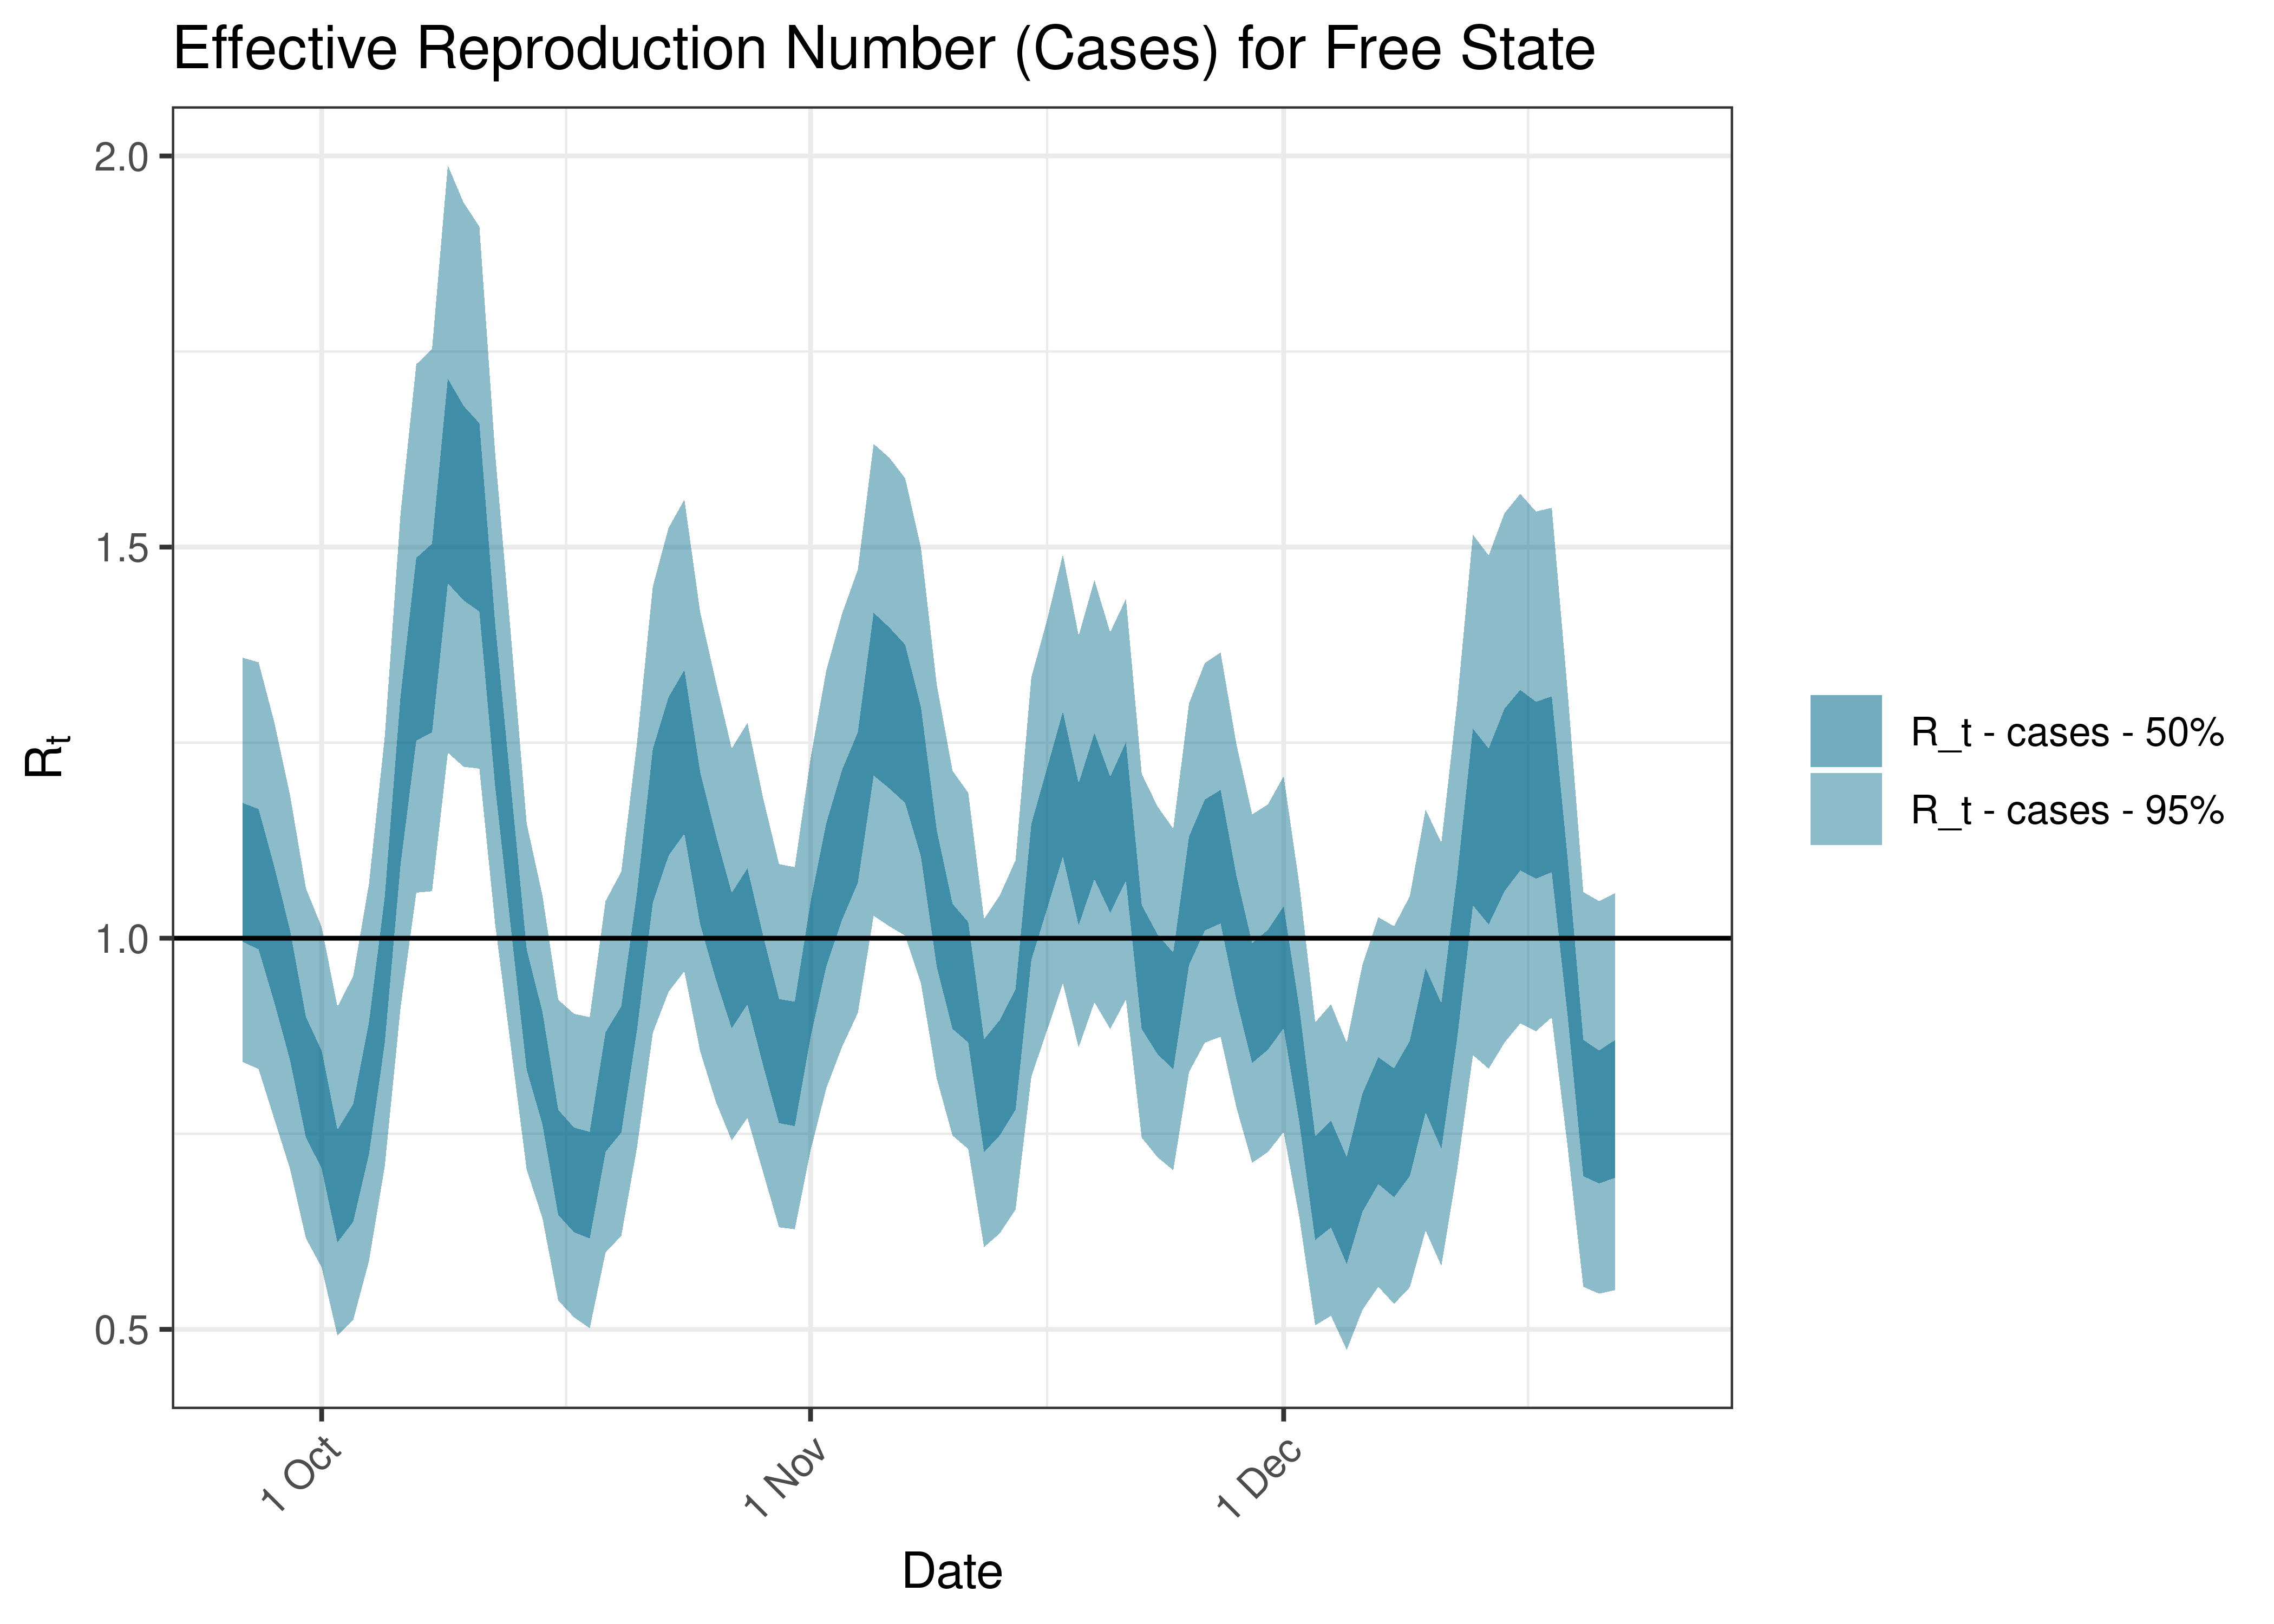 Estimated Effective Reproduction Number Based on Cases for Free State over last 90 days